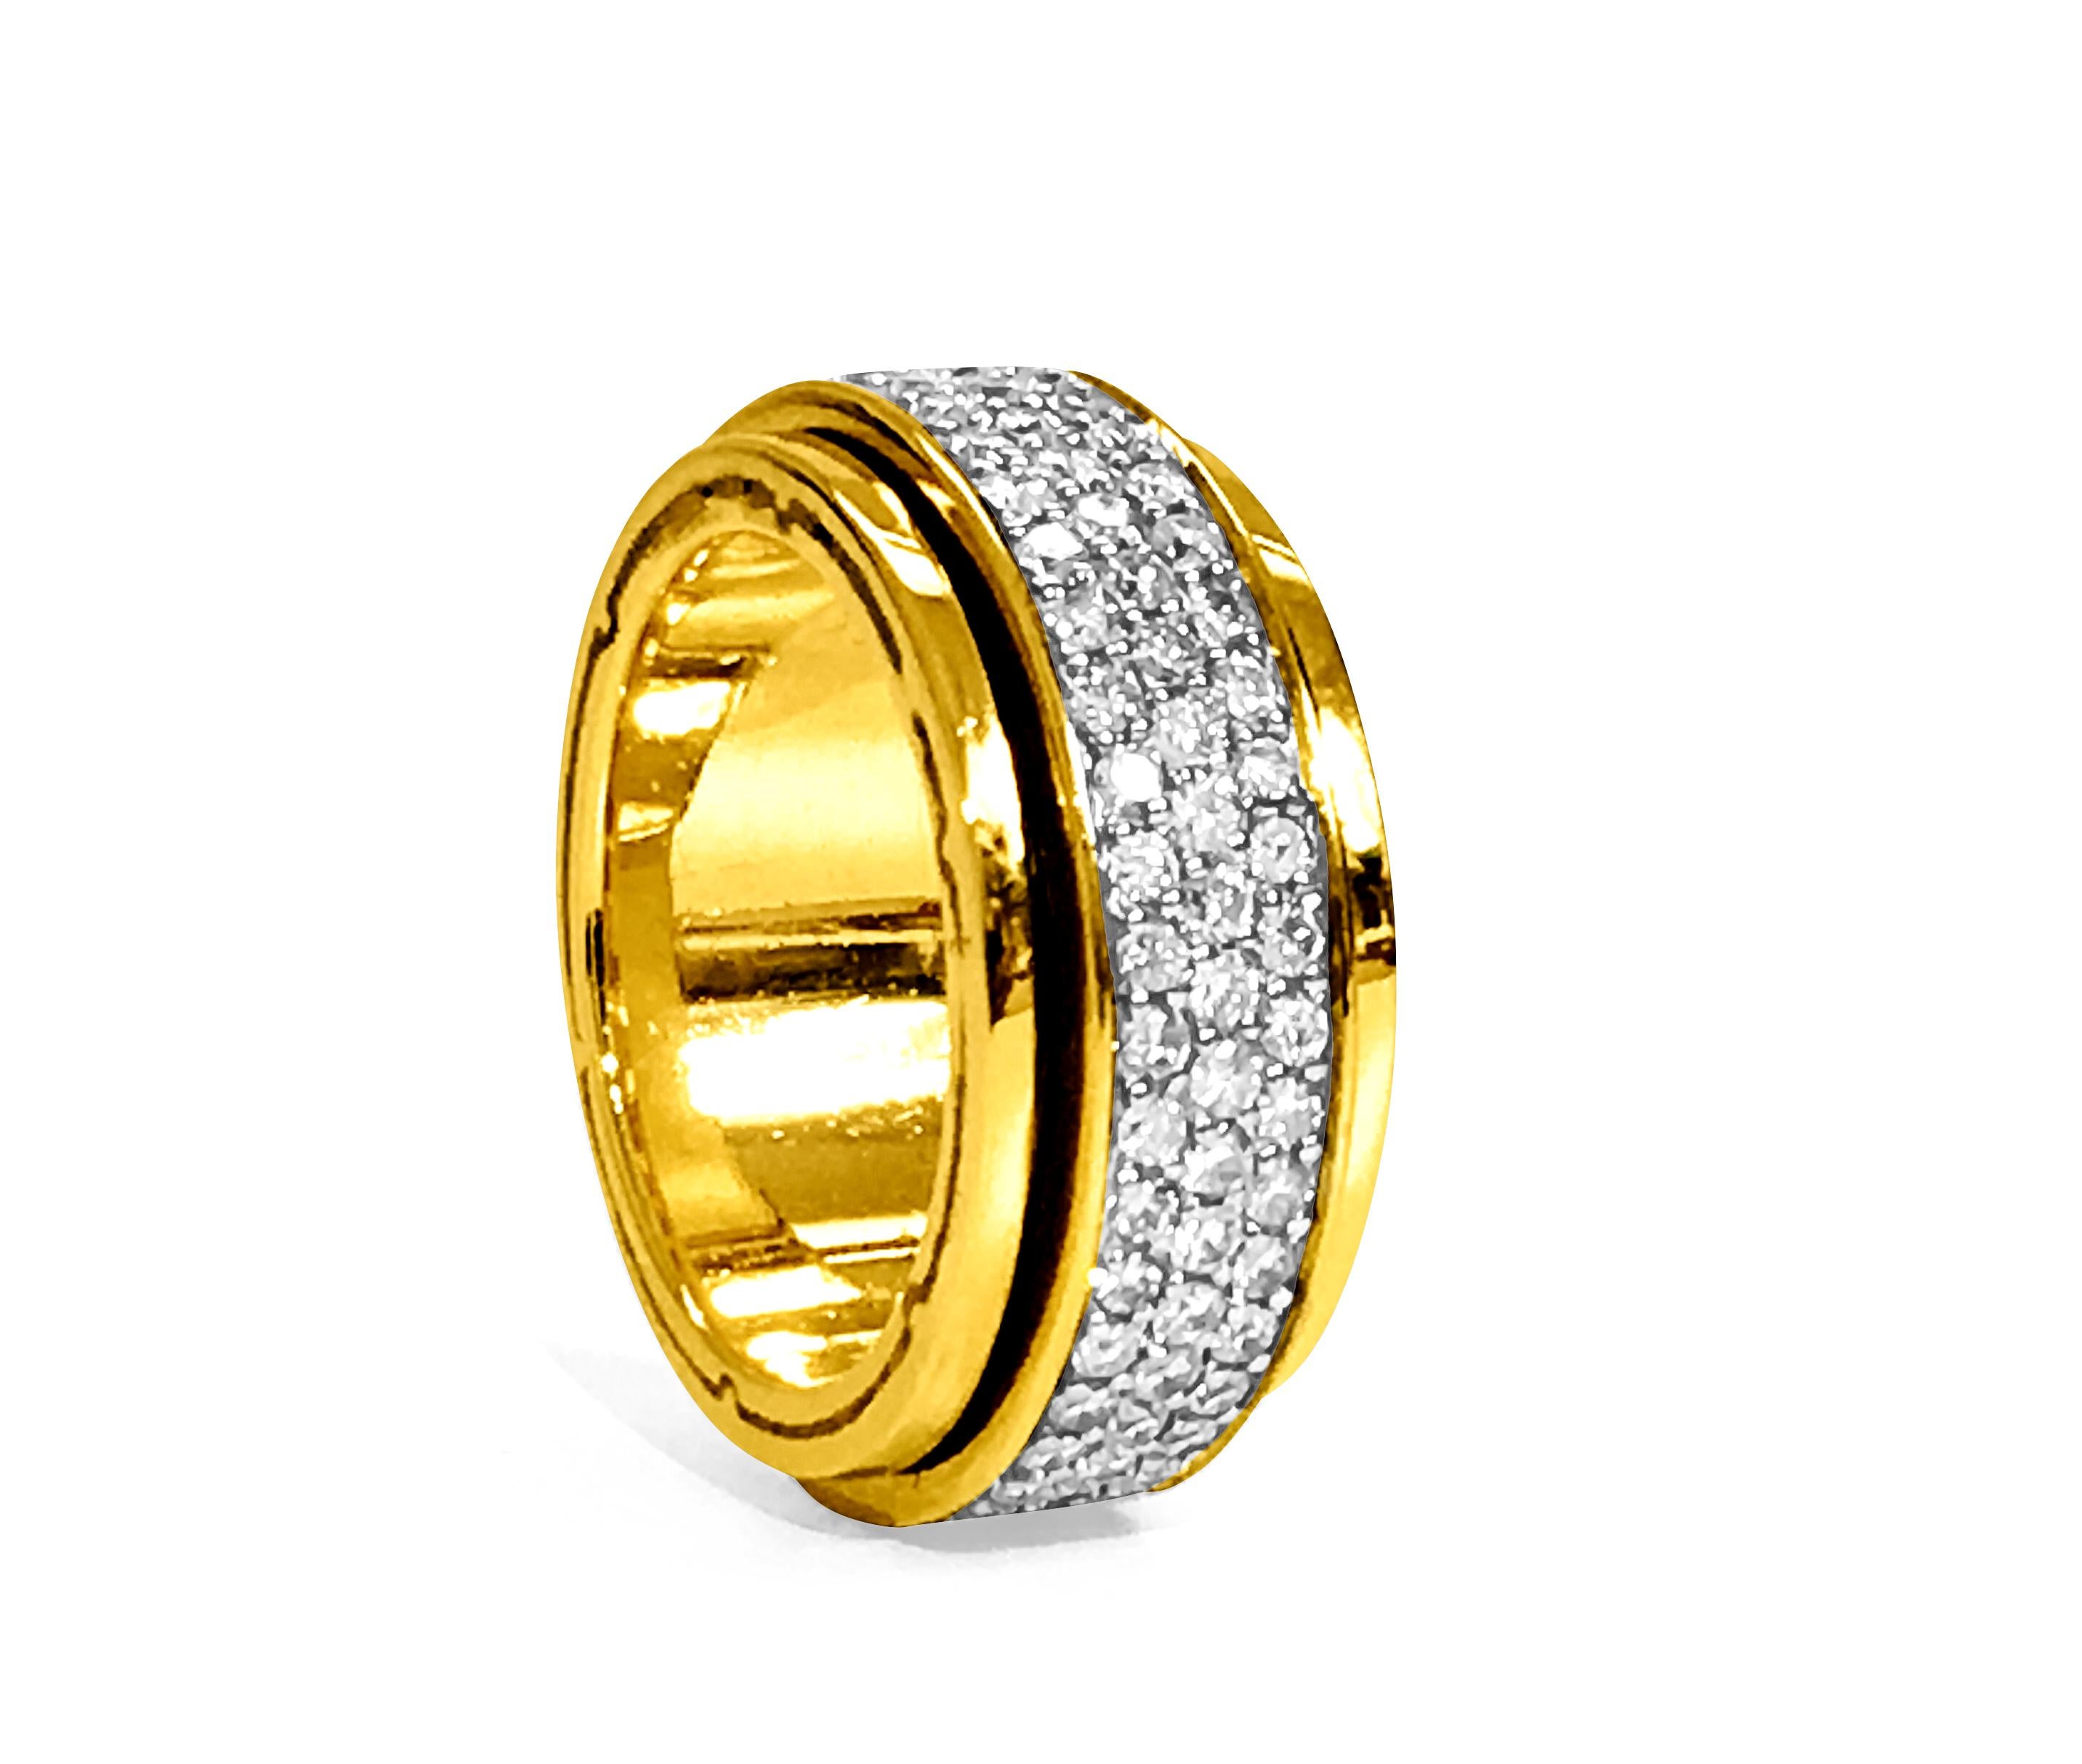 Metal: 18K Yellow Gold. 

4.50 Carat diamonds. VVS clarity and F-G color. Round brilliant cut diamonds set in prong setting cluster. 

Special feature: rotating band. 

High end custom made diamond ring. Very high quality diamond - fantastic